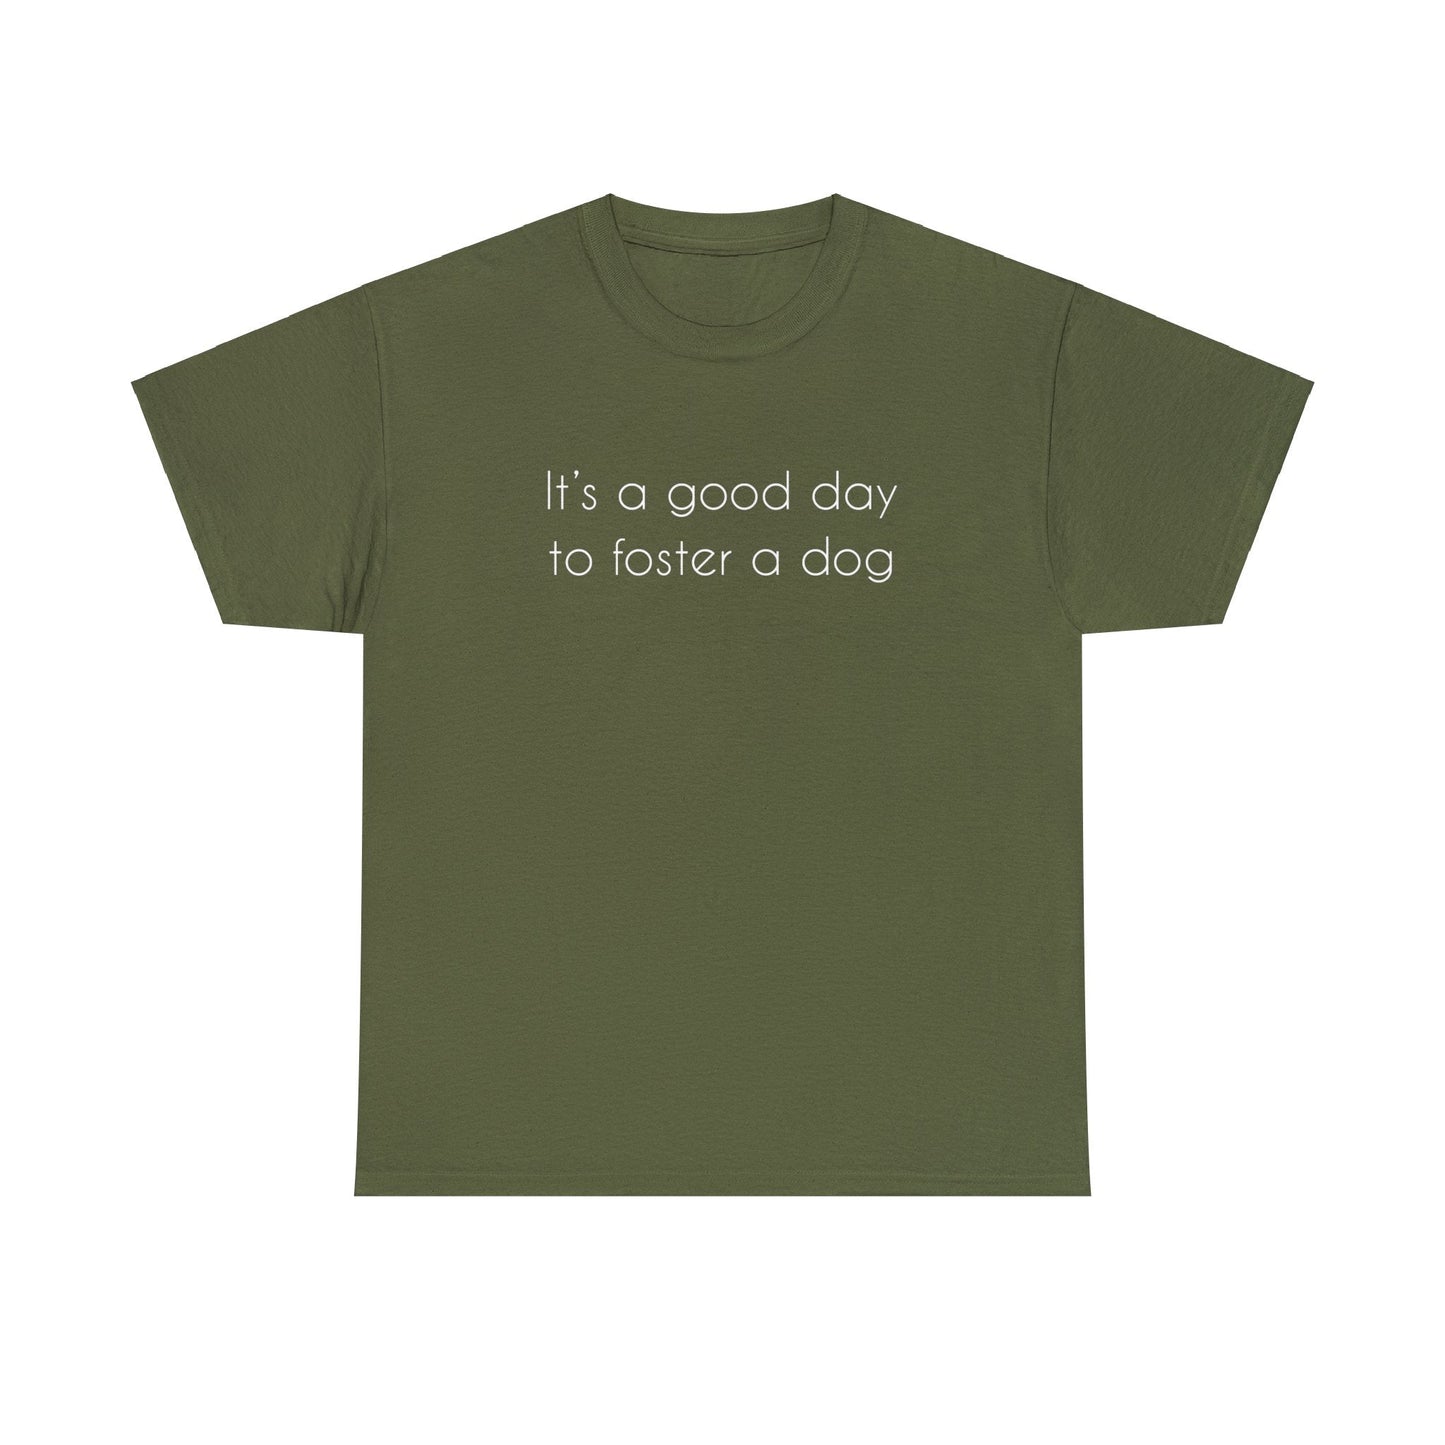 It's A Good Day To Foster A Dog | Text Tees - Detezi Designs-14484913079783435904